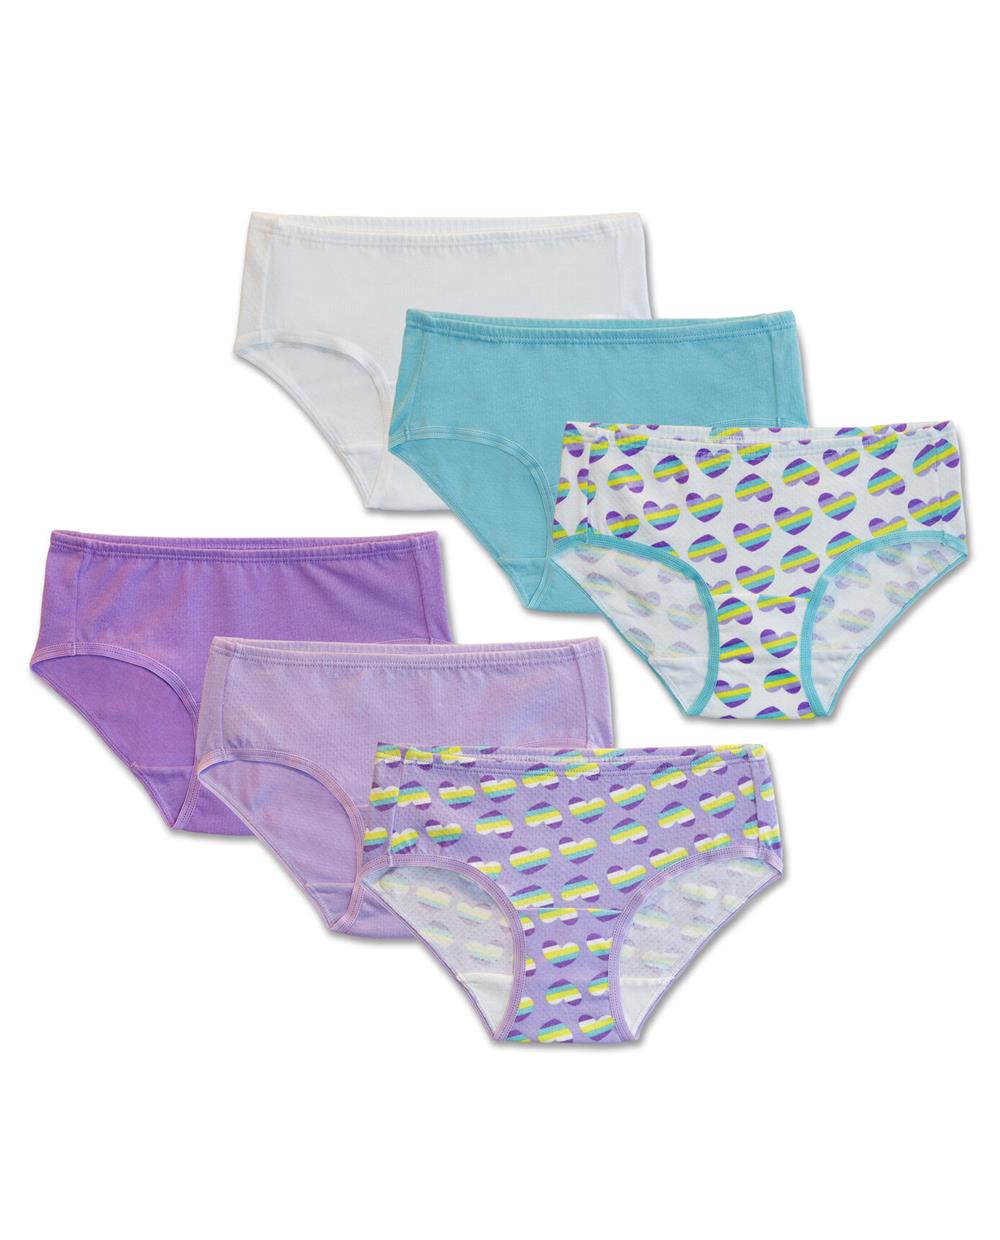 Fruit of the Loom Women's Cotton Stretch Hipster Underwear, 6 Pack